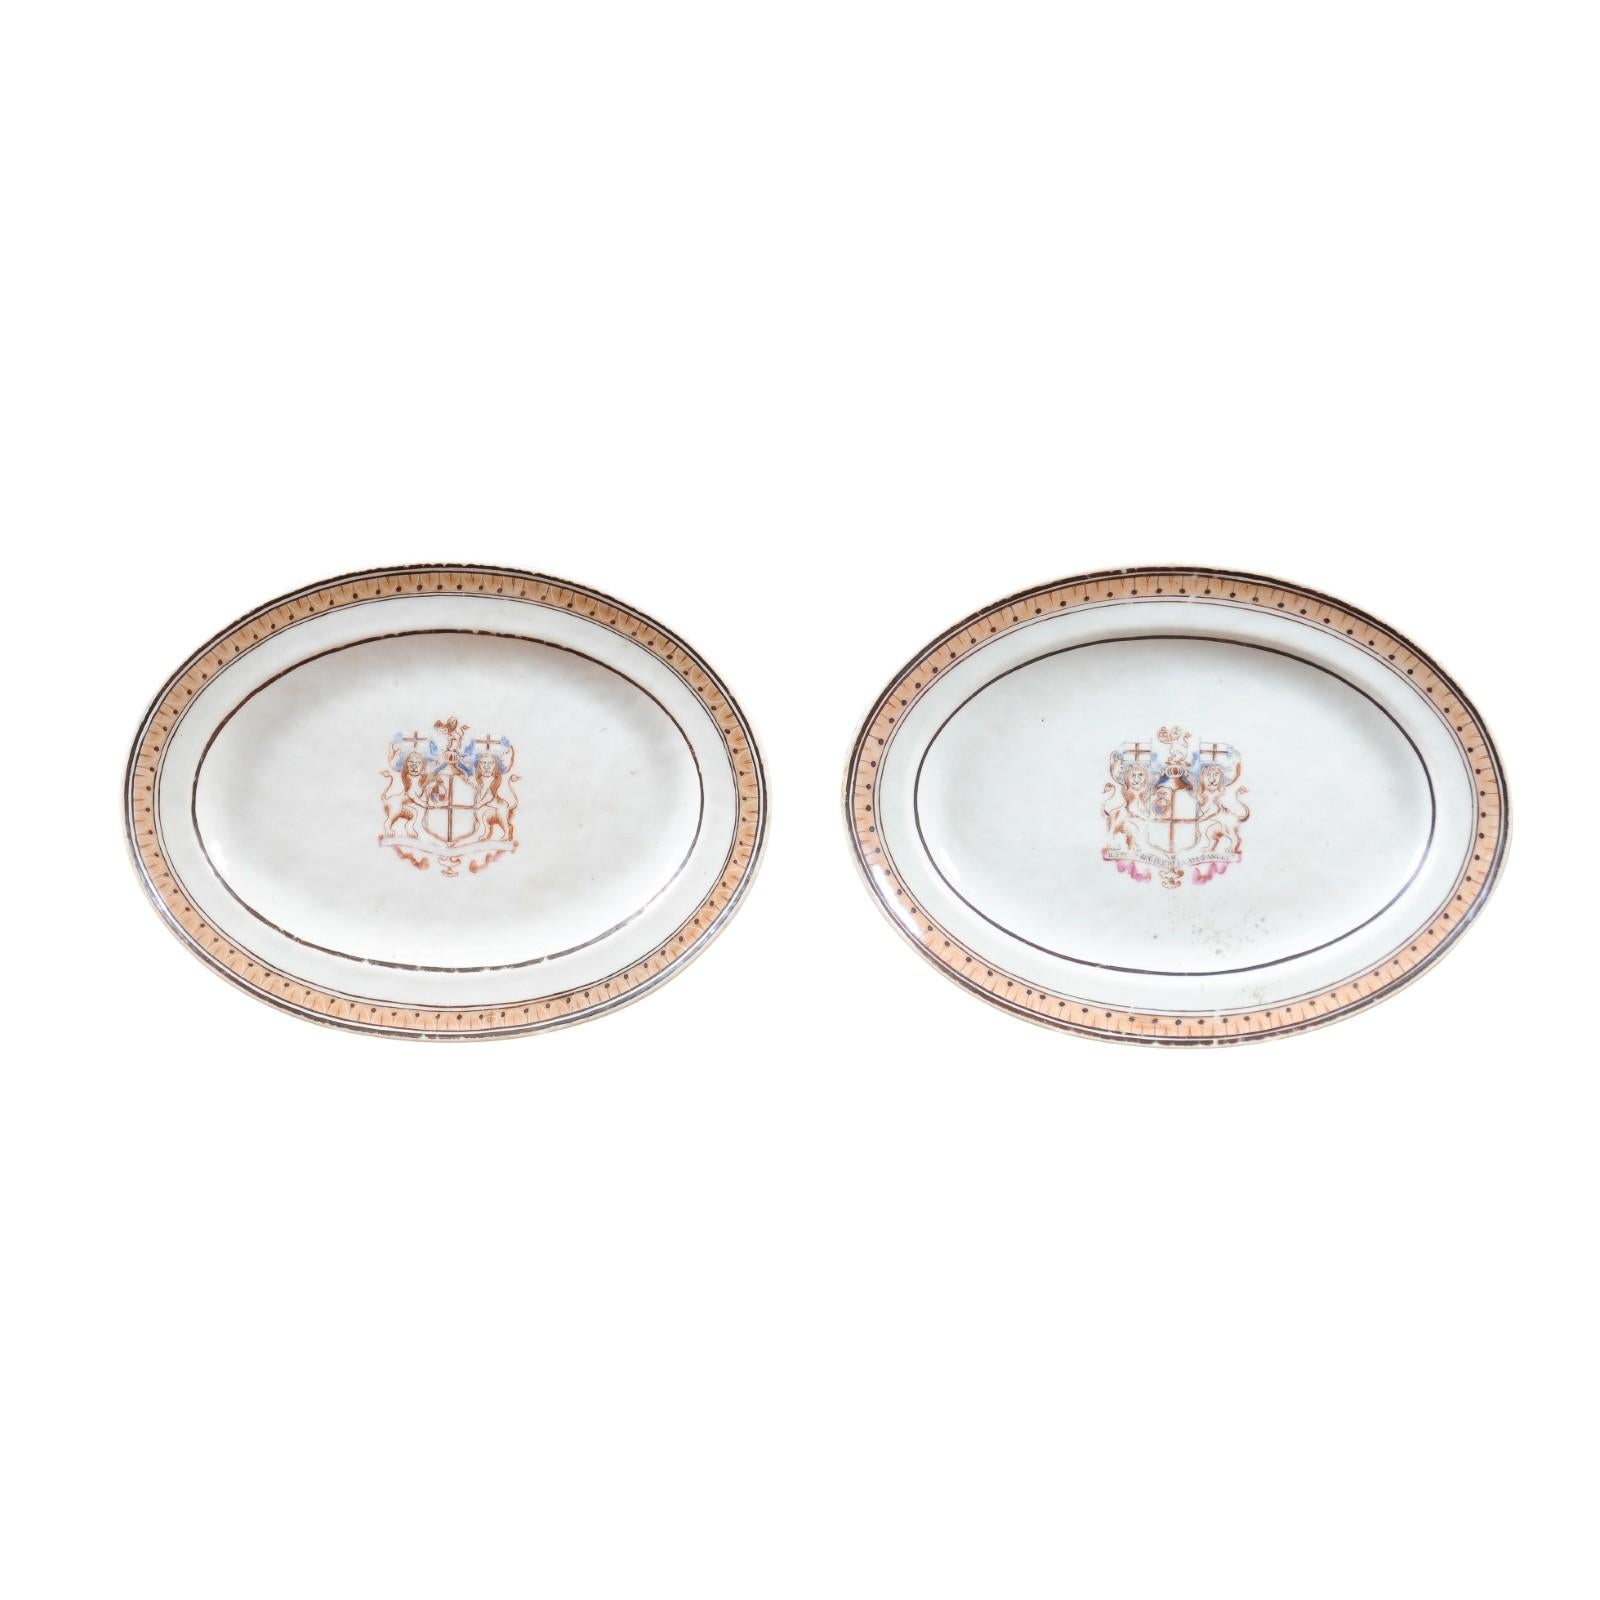 Pair of 18th Century Chinese Export Porcelain Platters with Armorial Crests For Sale 11